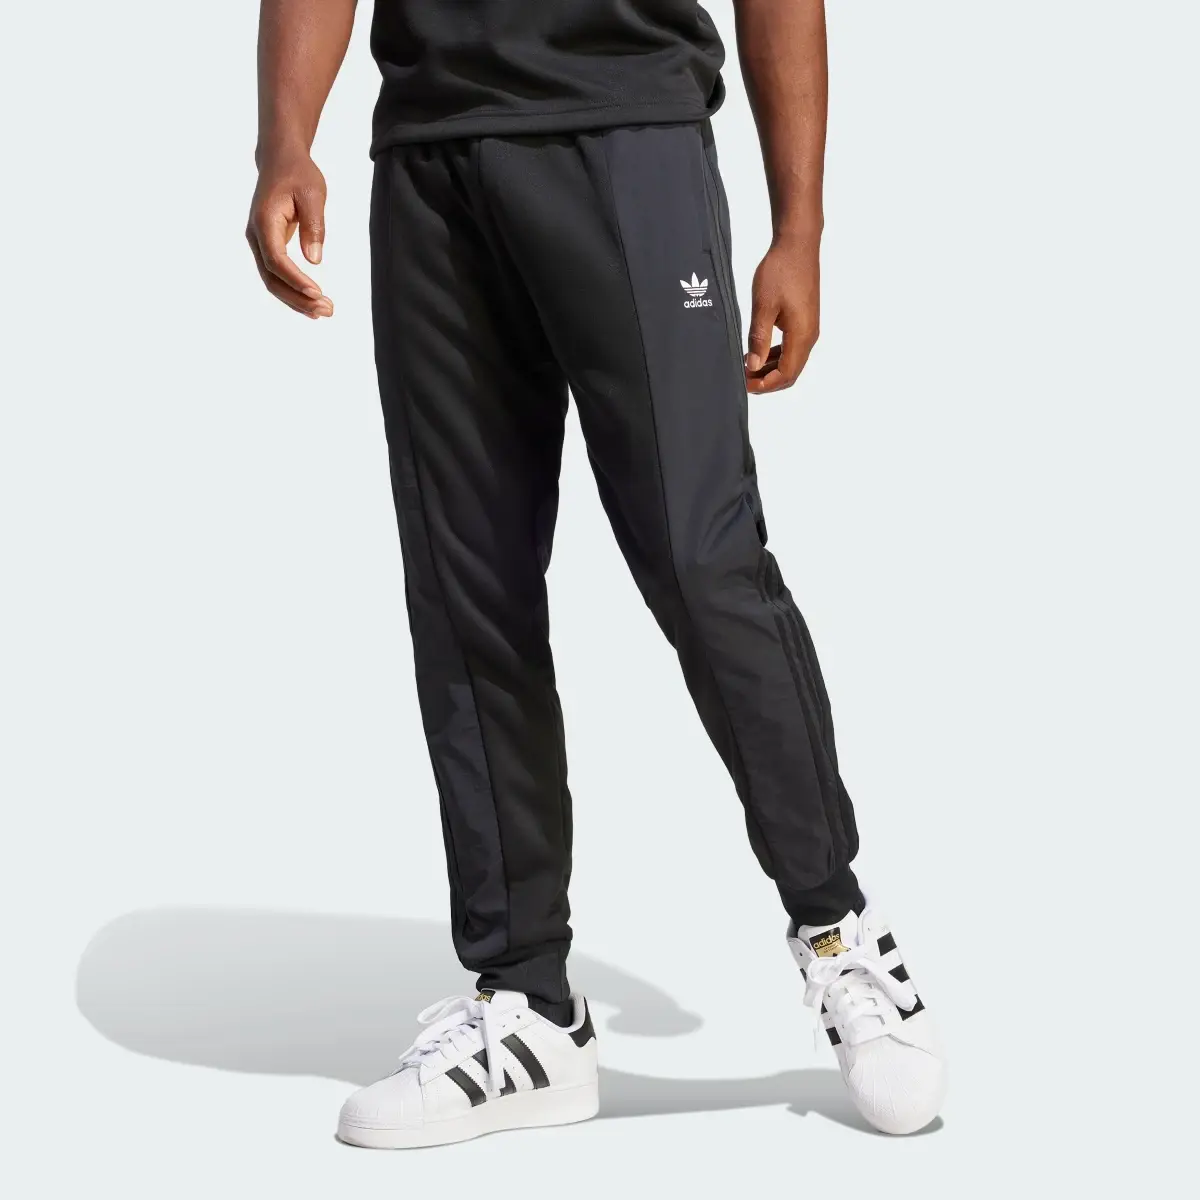 Adidas Track pants adicolor Re-Pro SST Material Mix. 1